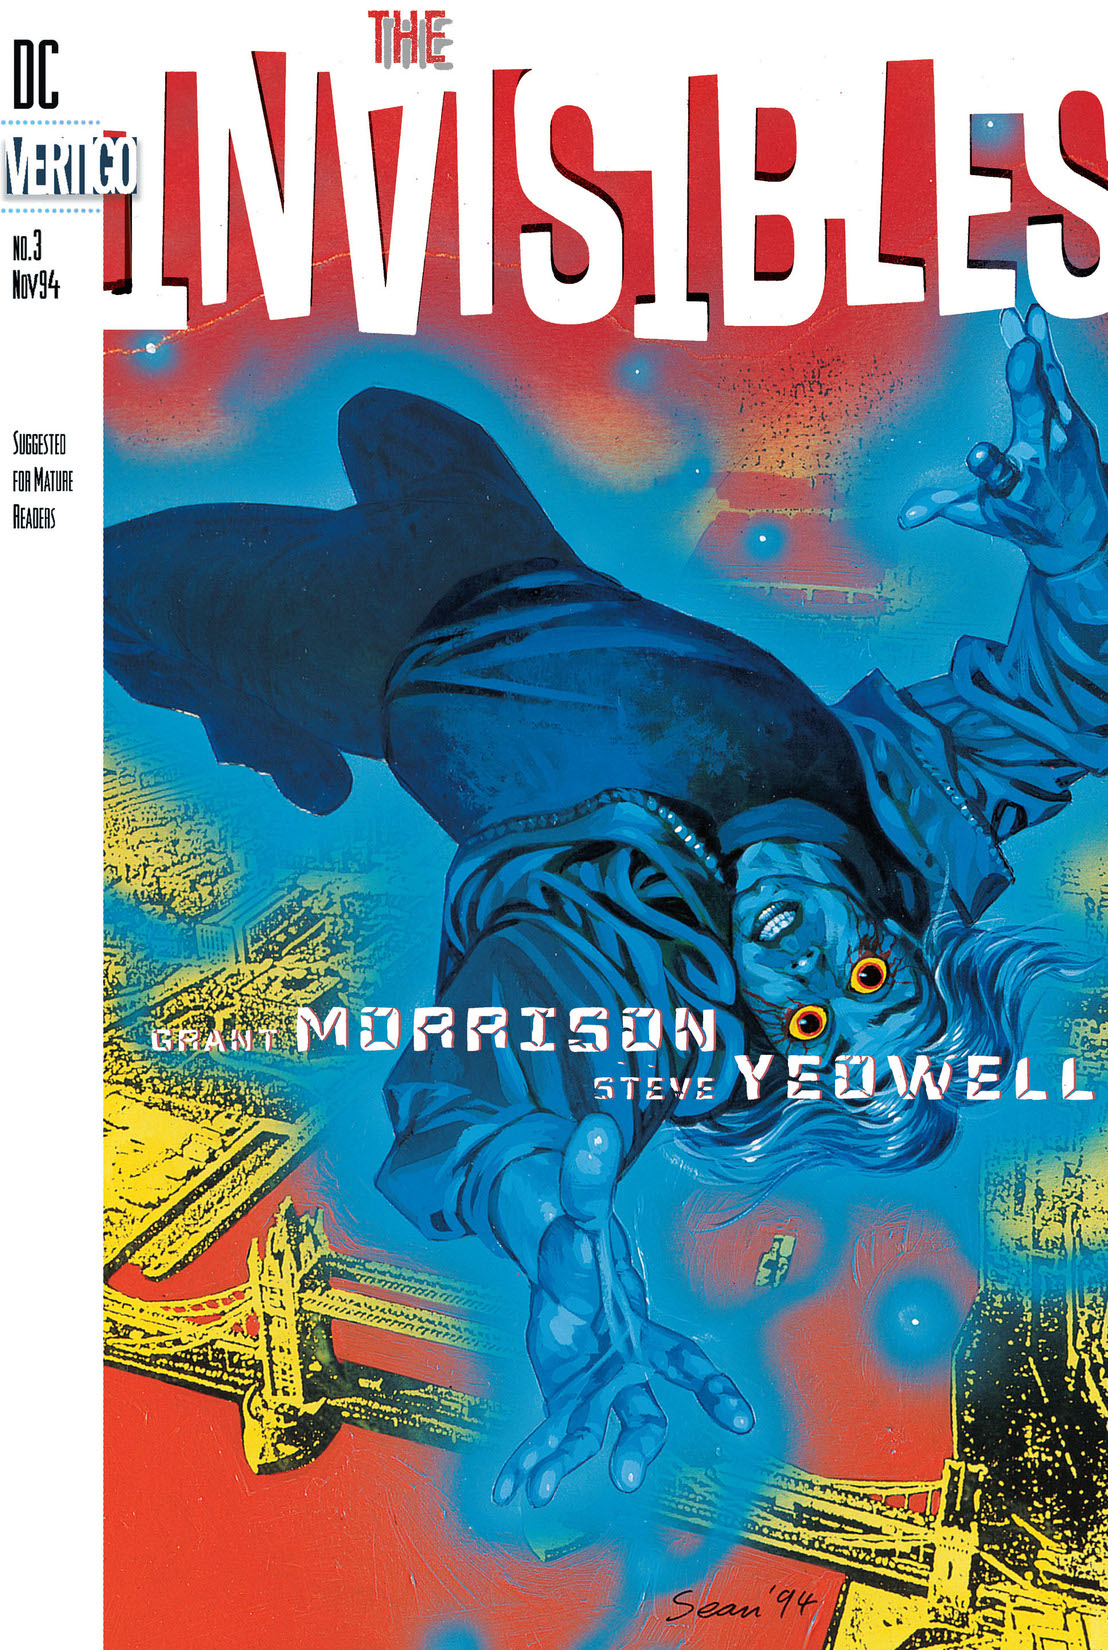 The Invisibles #3 preview images